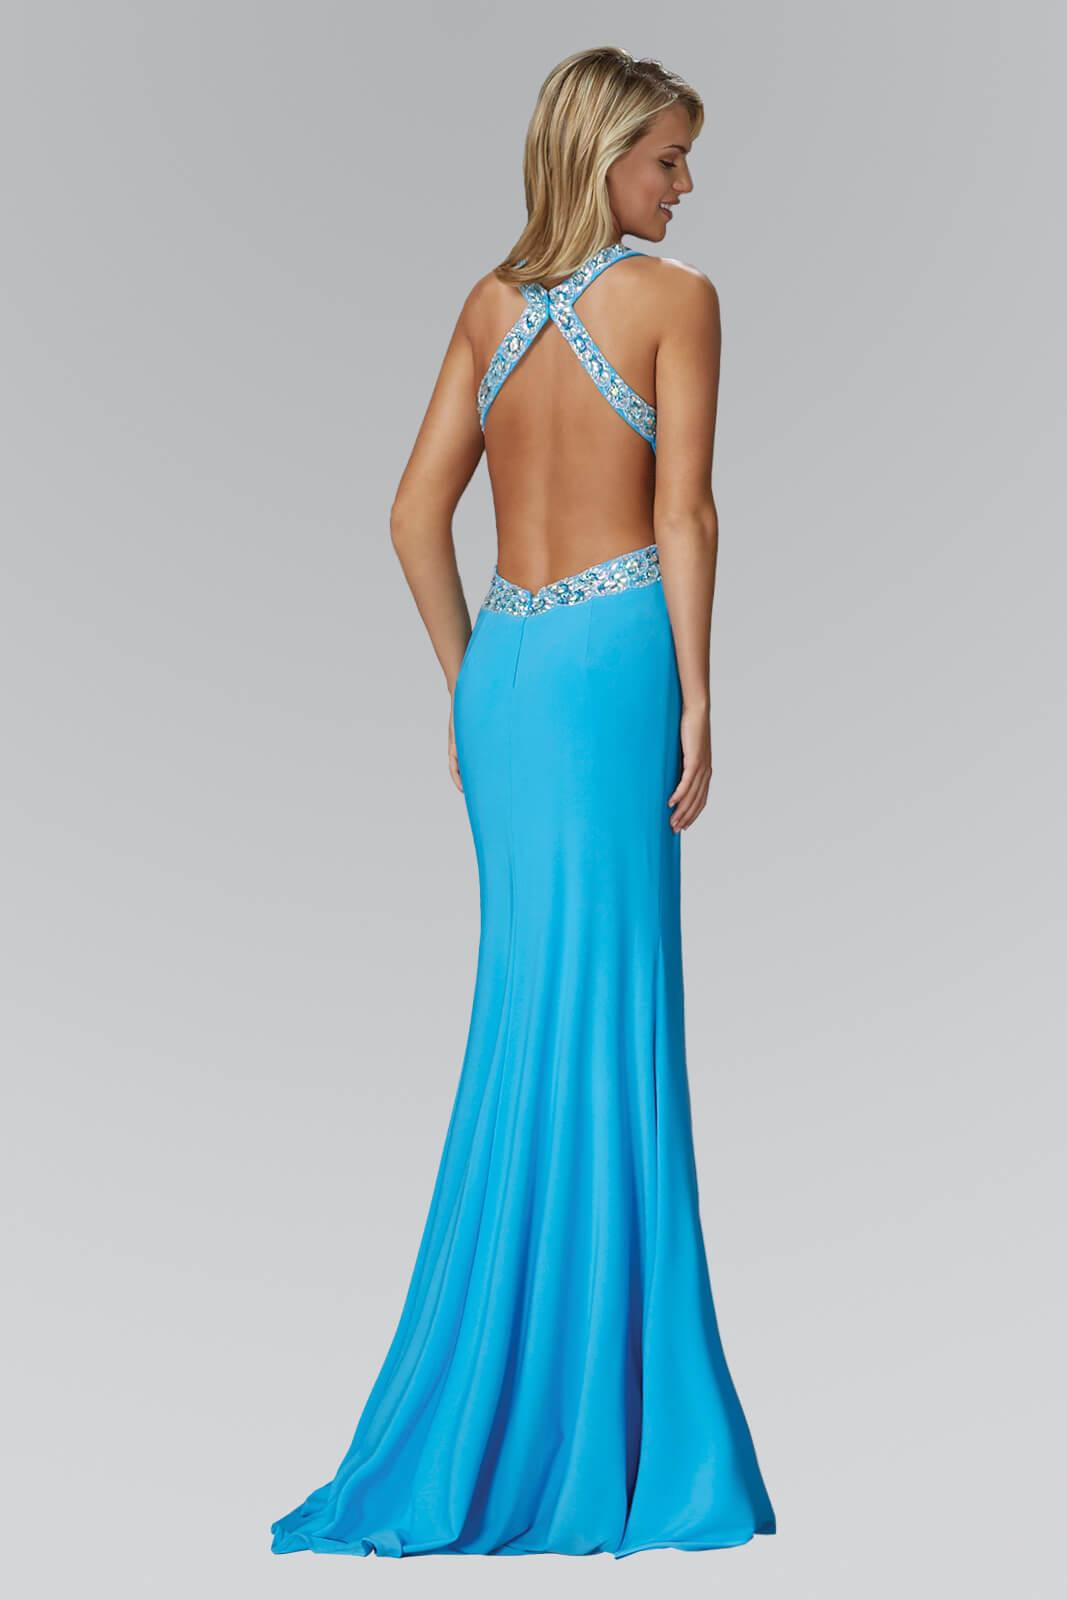 Long Prom Dress Fromal Mermaid Fit Evening Gown - The Dress Outlet Elizabeth K